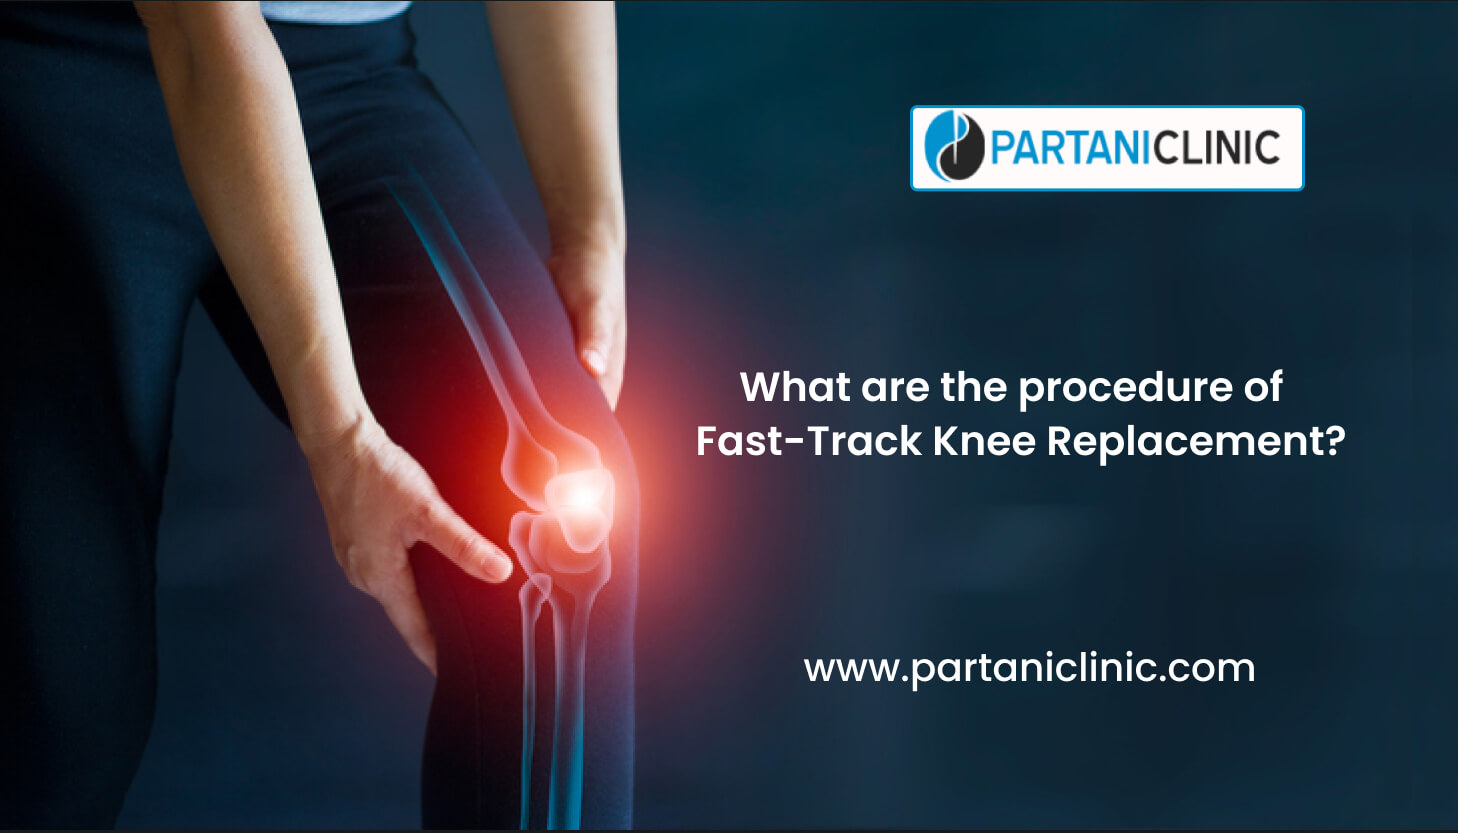 Procedure of Fast-Track Knee Replacement